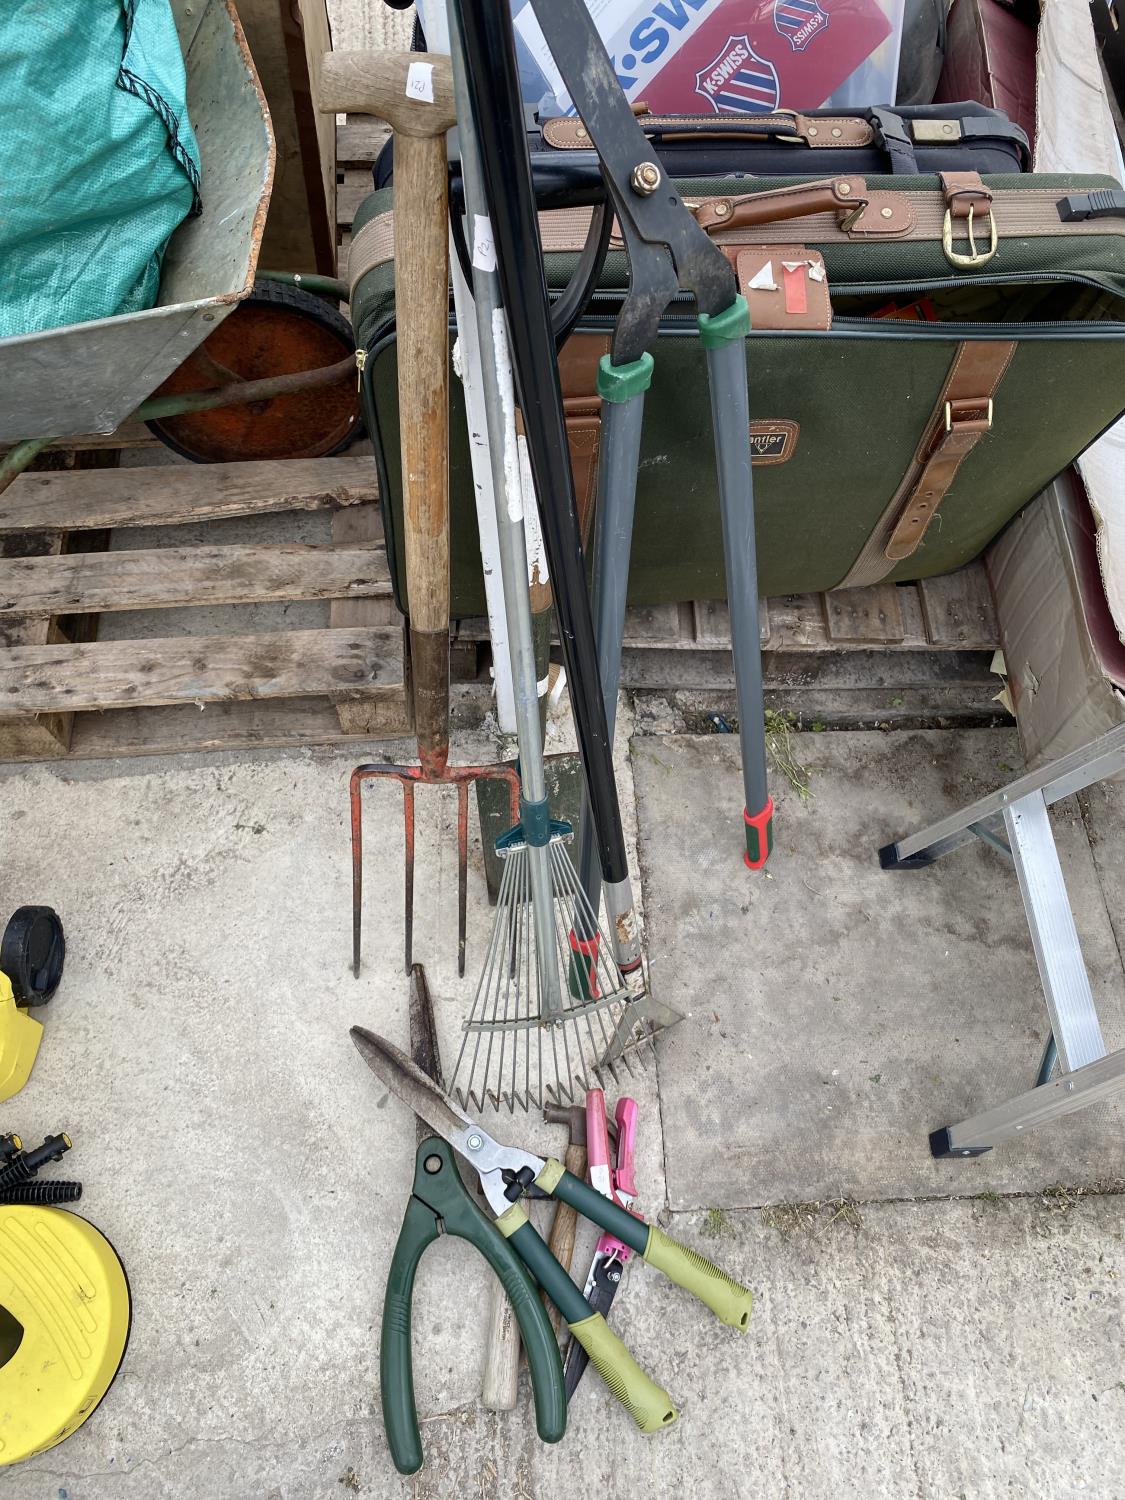 AN ASSORTMENT OF GARDEN TOOLS TO INCLUDE A RAKE, SHEARS AND A FORK ETC